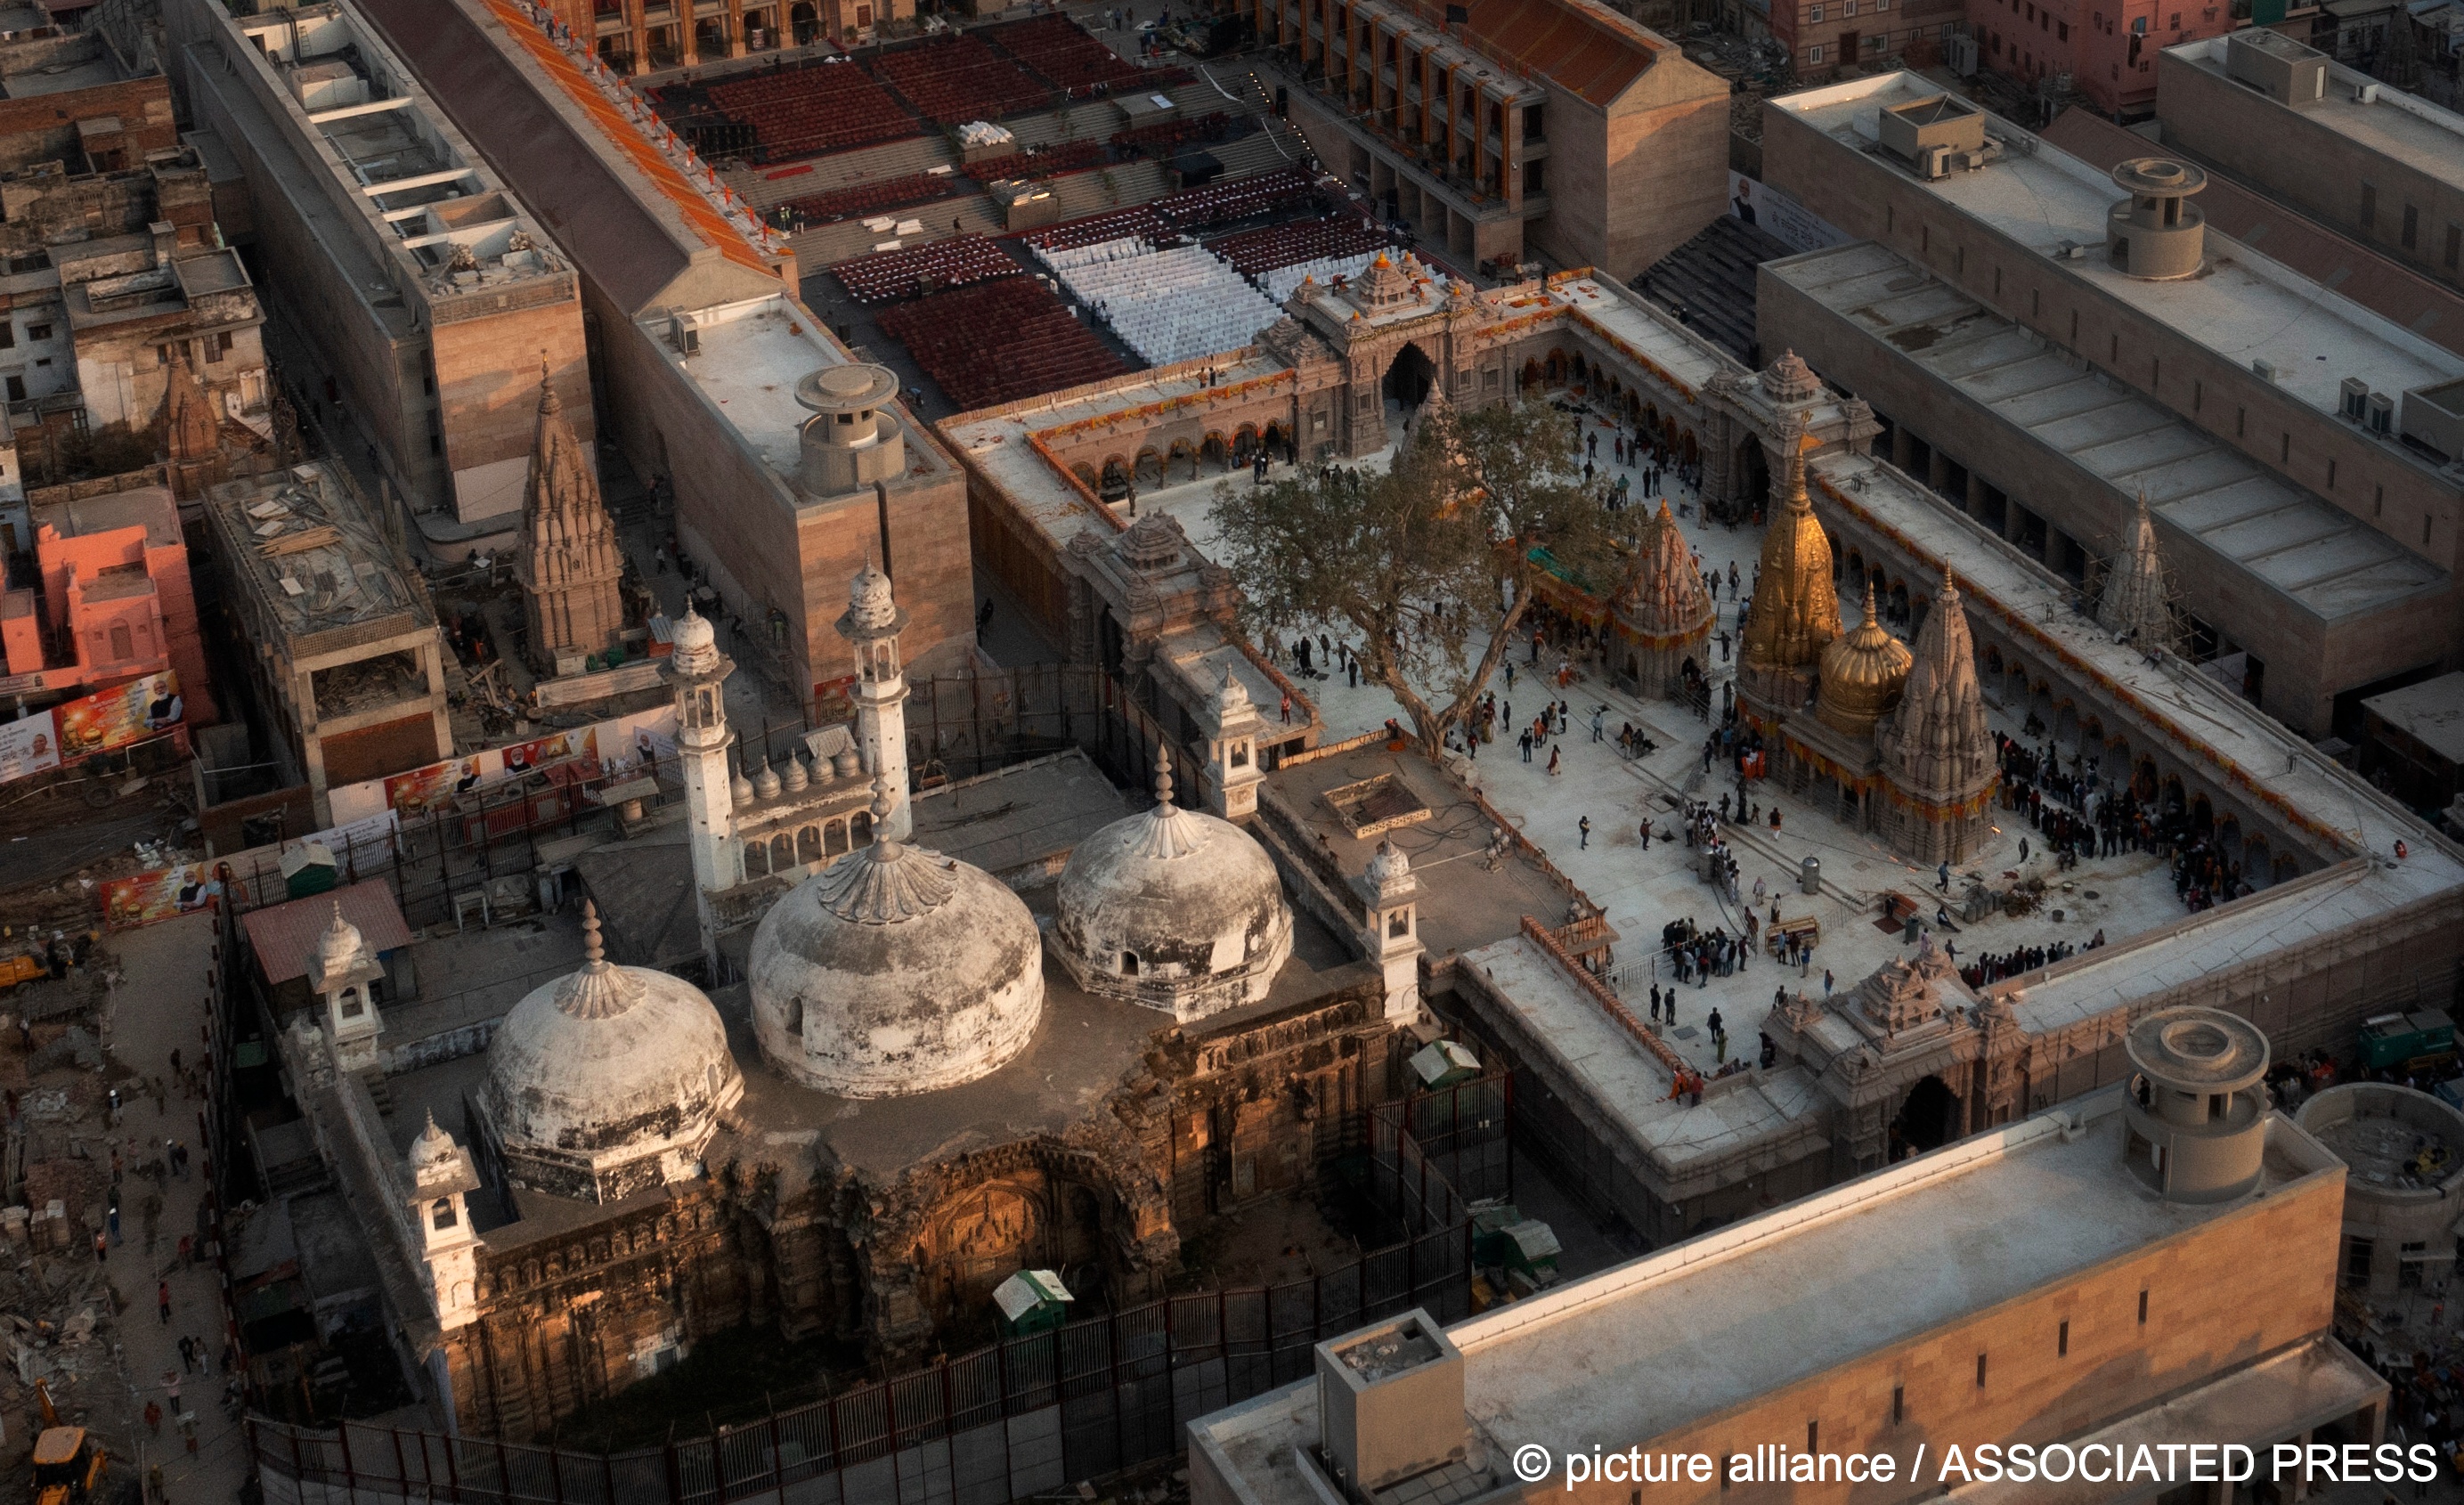 An aerial view shows Gyanvapi Mosque, left, and Kashi Vishwanath Temple on the banks of the Ganges river in Varanasi, India